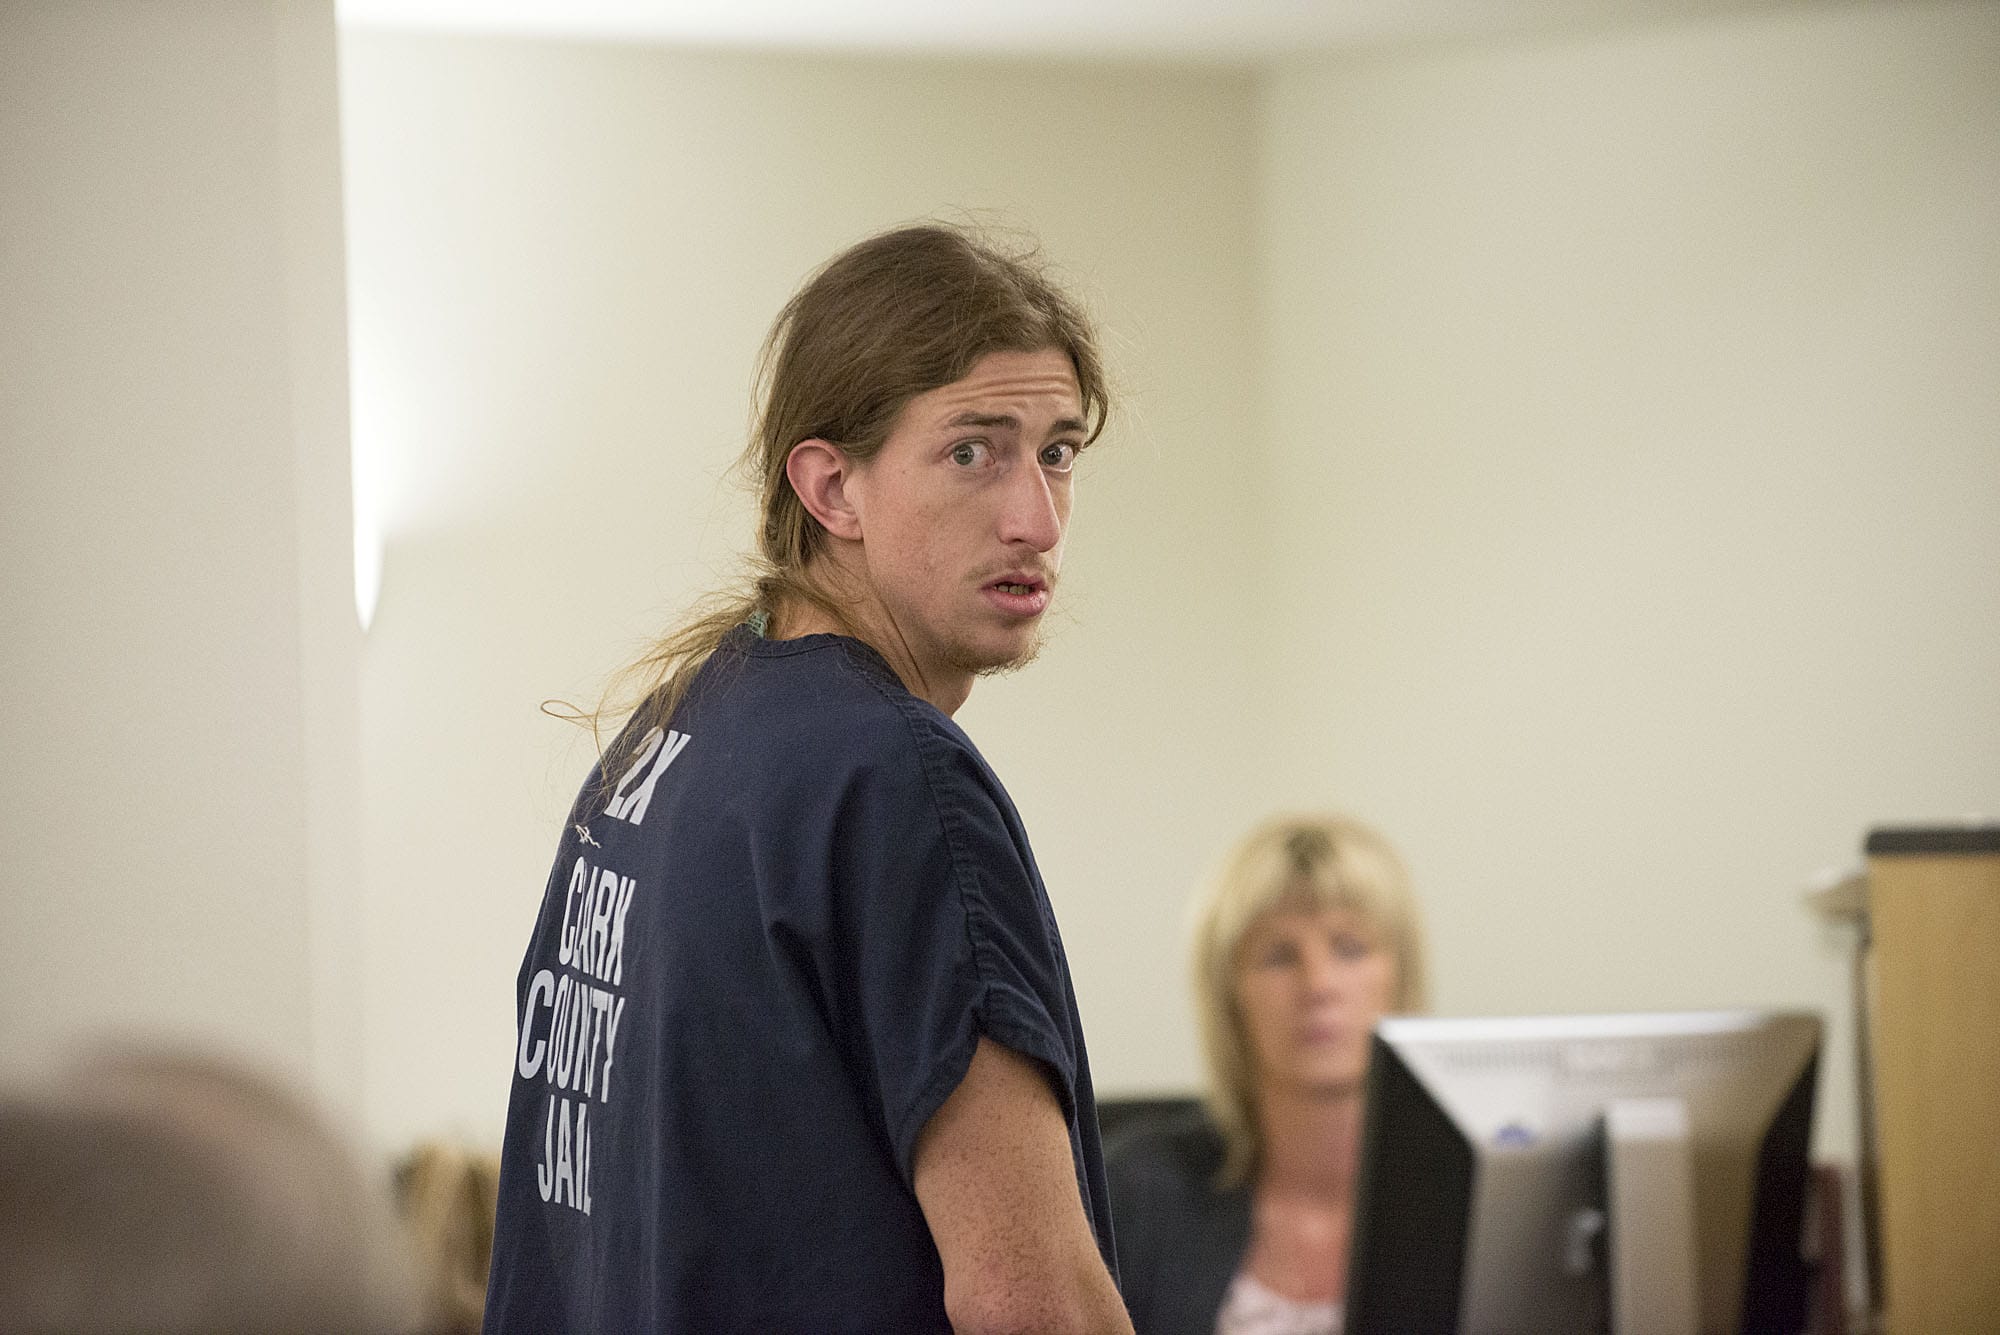 Timothy Michael Delisle, 23, of Portland who allegedly led Clark County Sheriff's deputies on a vehicle and foot chase Thursday afternoon on Northeast St. Johns Road makes a first appearance in Clark County Superior Court on Friday.